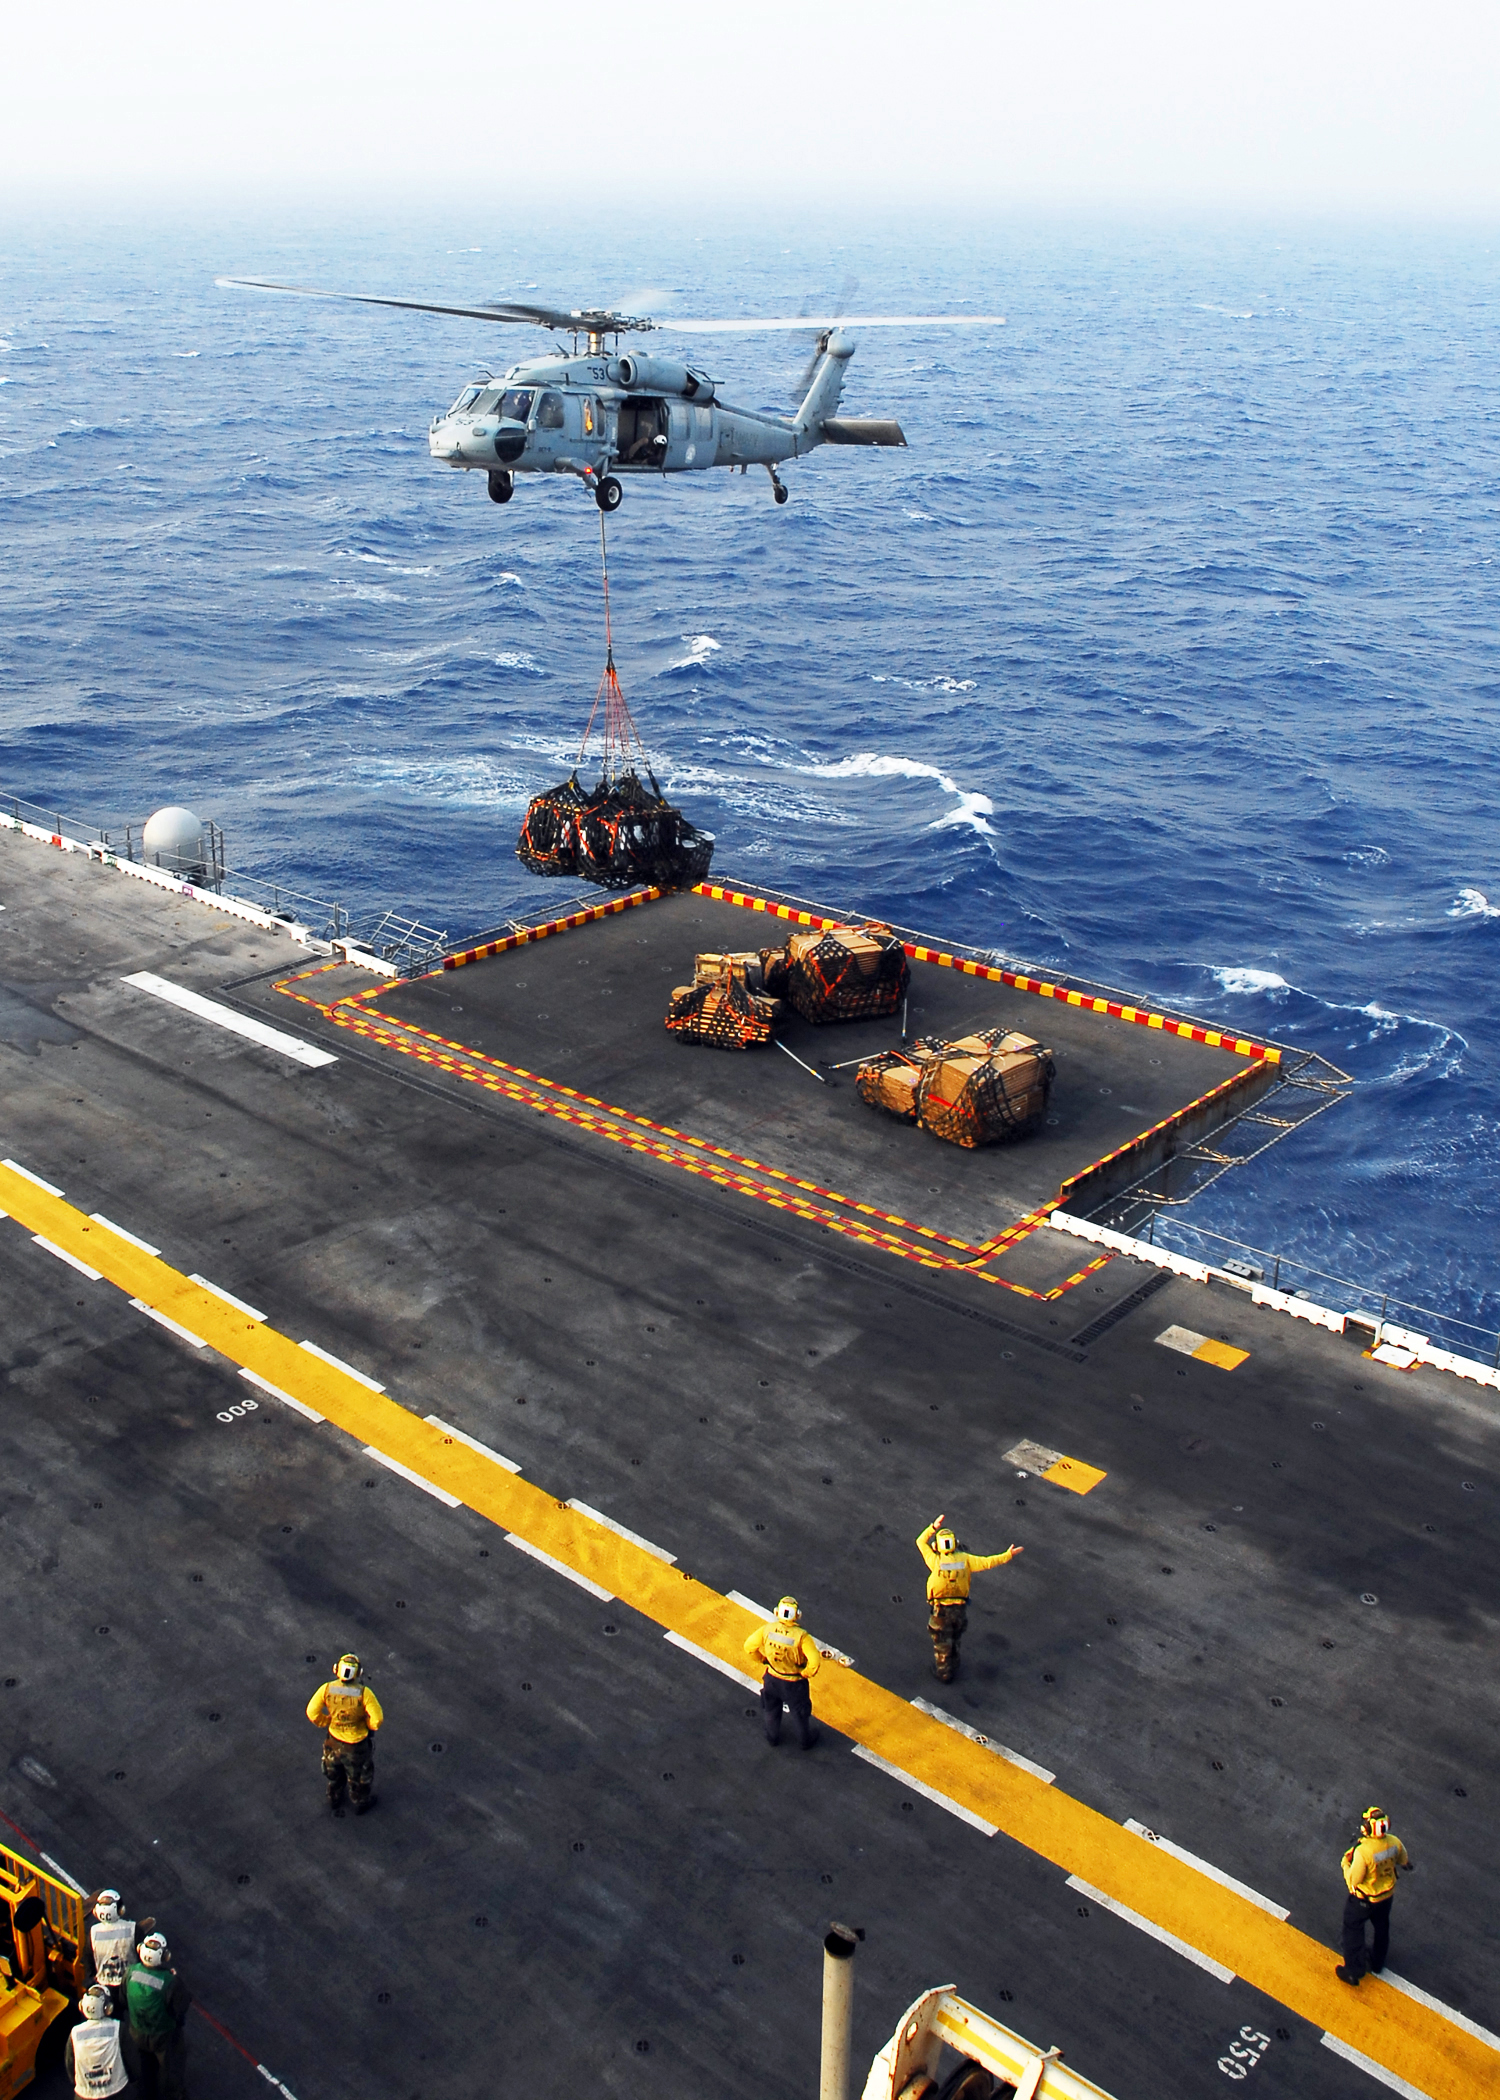 US Navy 080831-N-2183K-043 An MH-60S Sea Hawk helicopter delivers crates of supplies to the amphibious assault ship USS Peleliu (LHA 5) during a vertical replenishment at sea